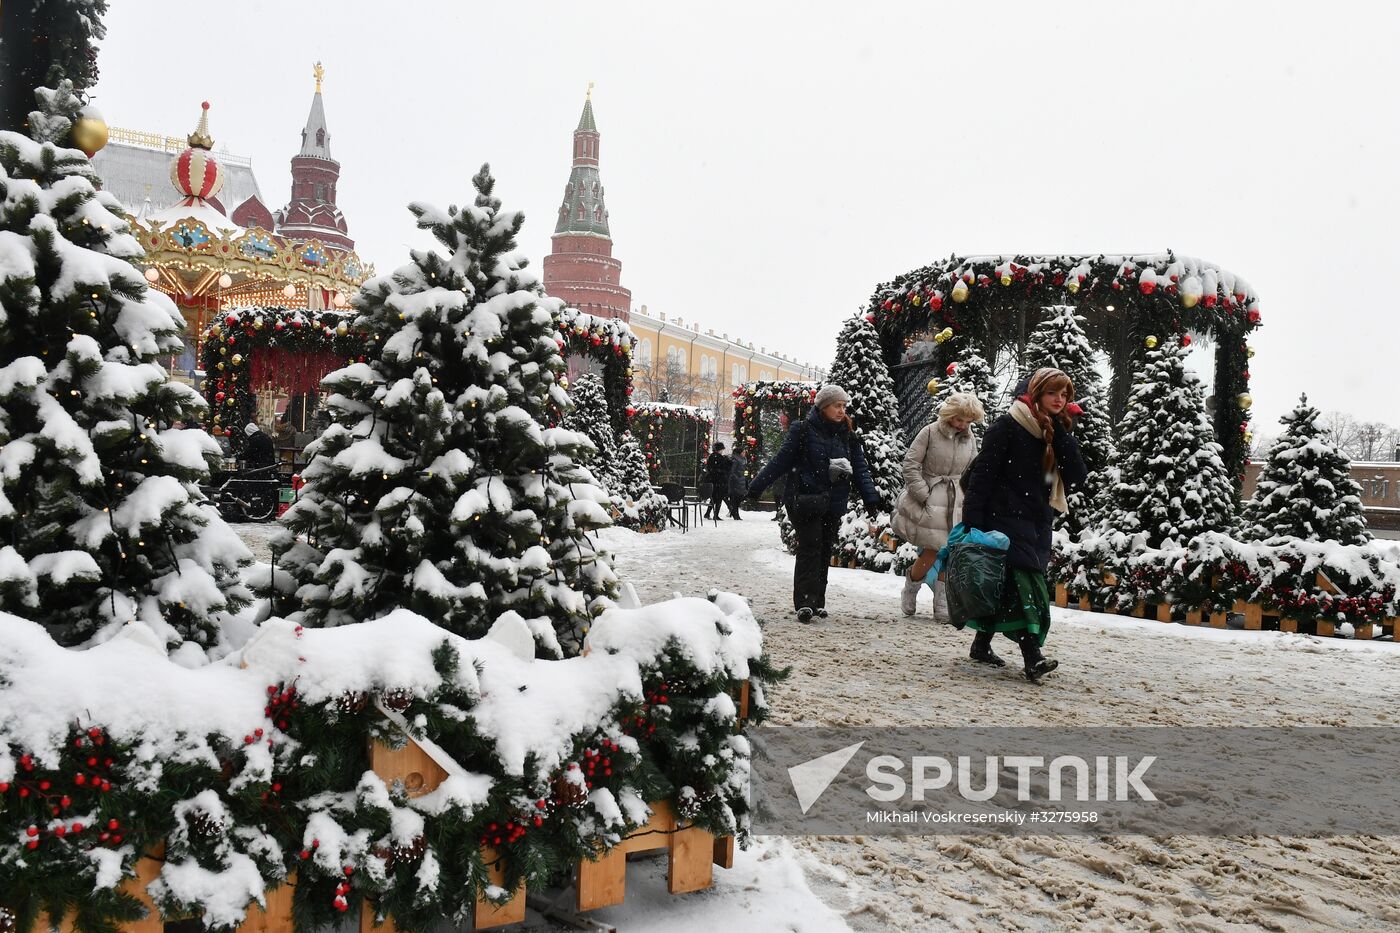 Moscow utility crews deal with snowfall aftermath